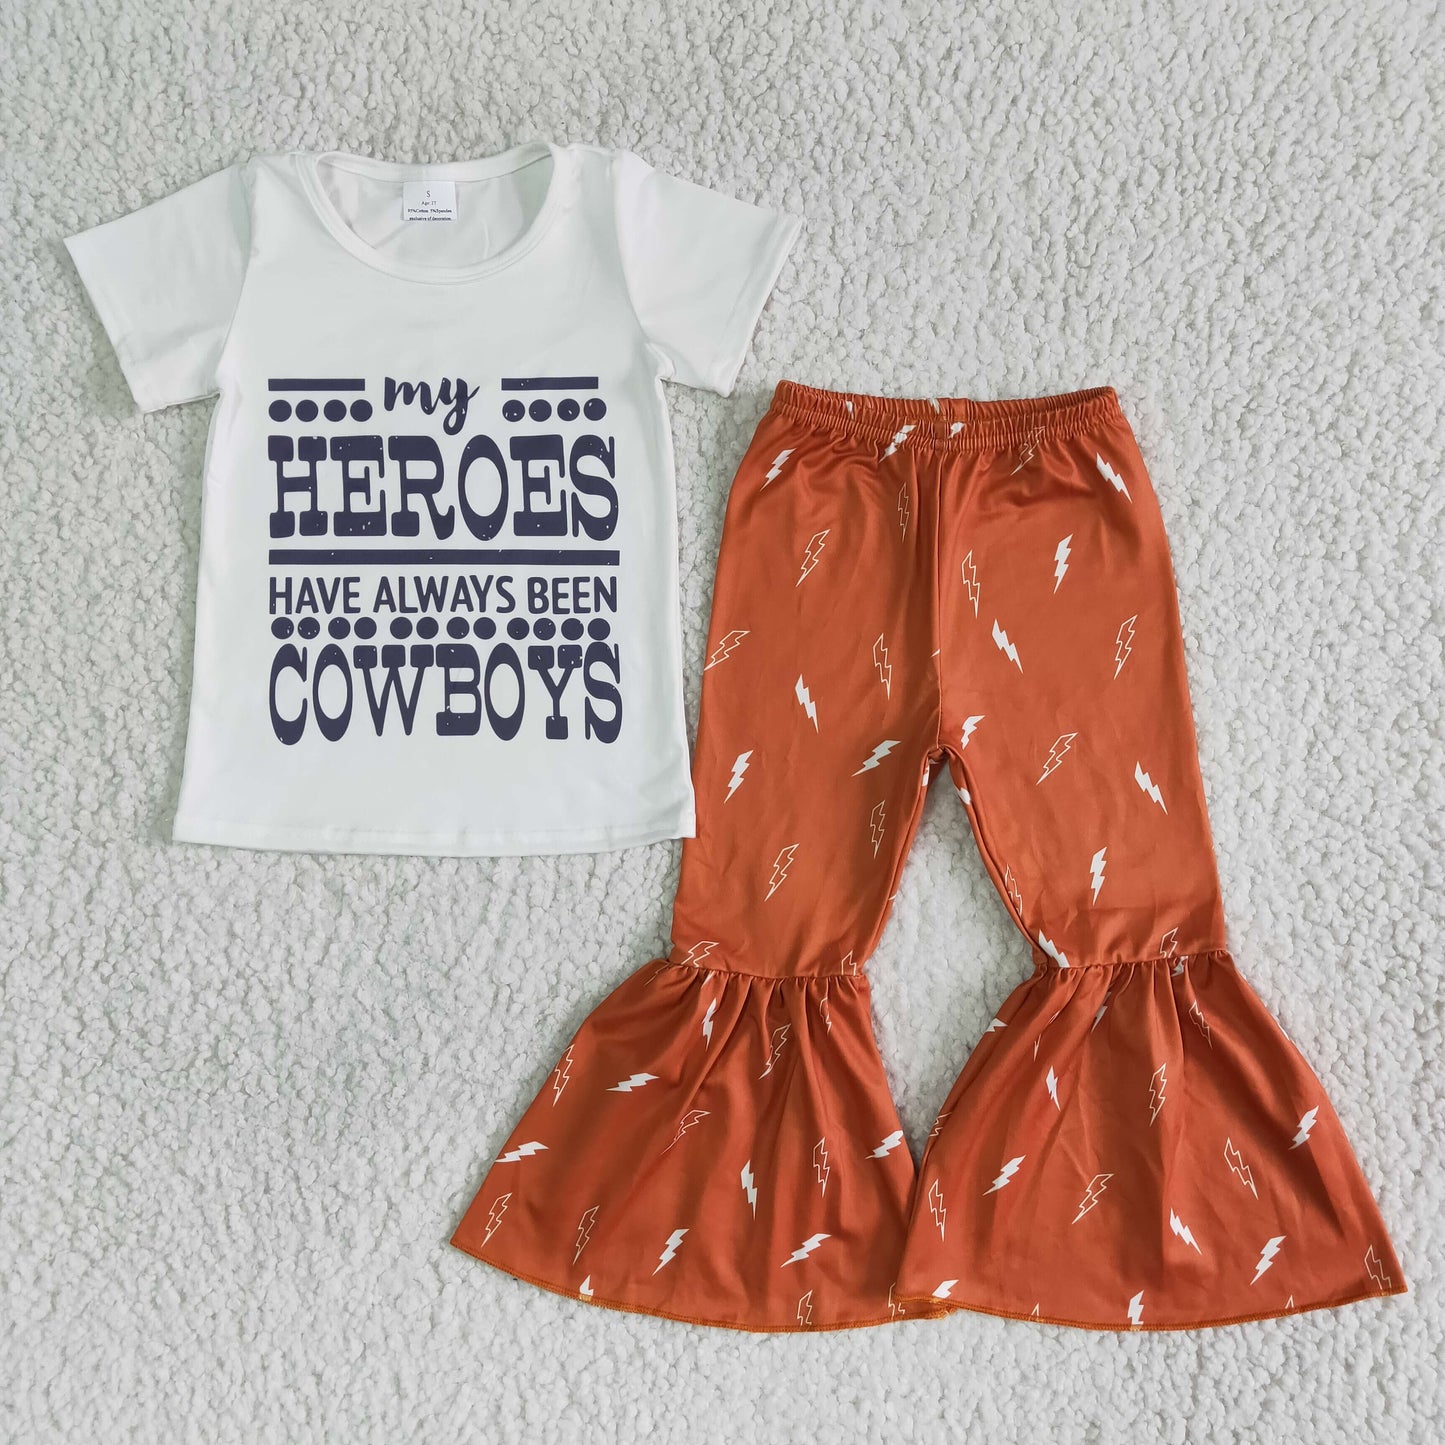 My heroes have always been cowboys girls clothing set